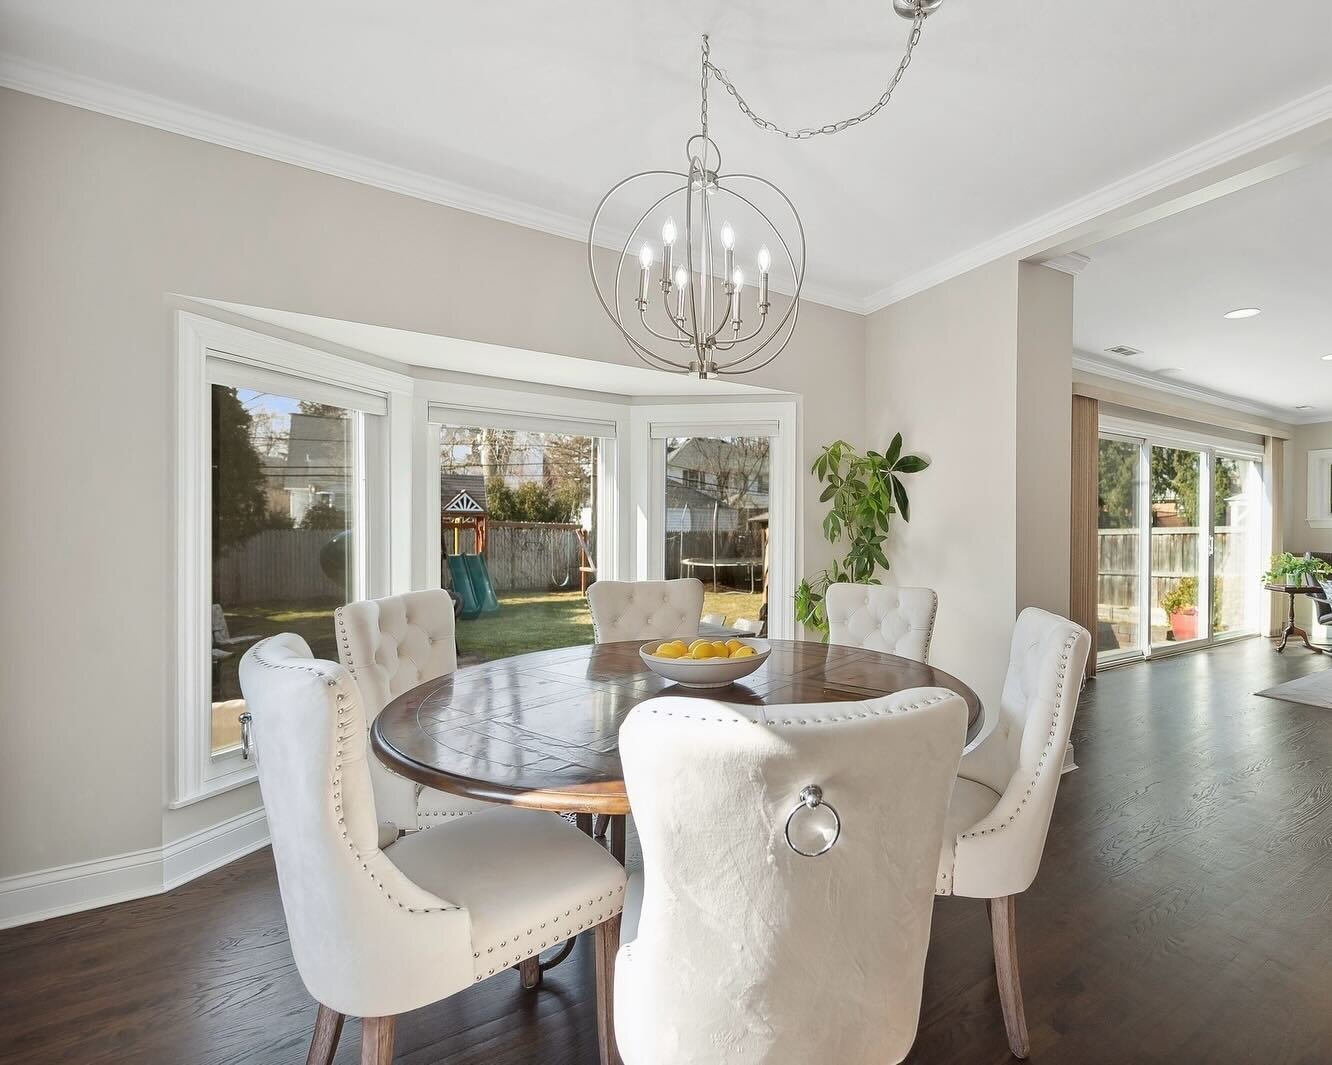 Unlock your space&rsquo;s potential with the magic of staging! 🔑✨

By stowing away family photos, applying a fresh coat of paint and updating the furnishings, this dining room now sets the stage for new beginnings and cherished shared moments.

726 